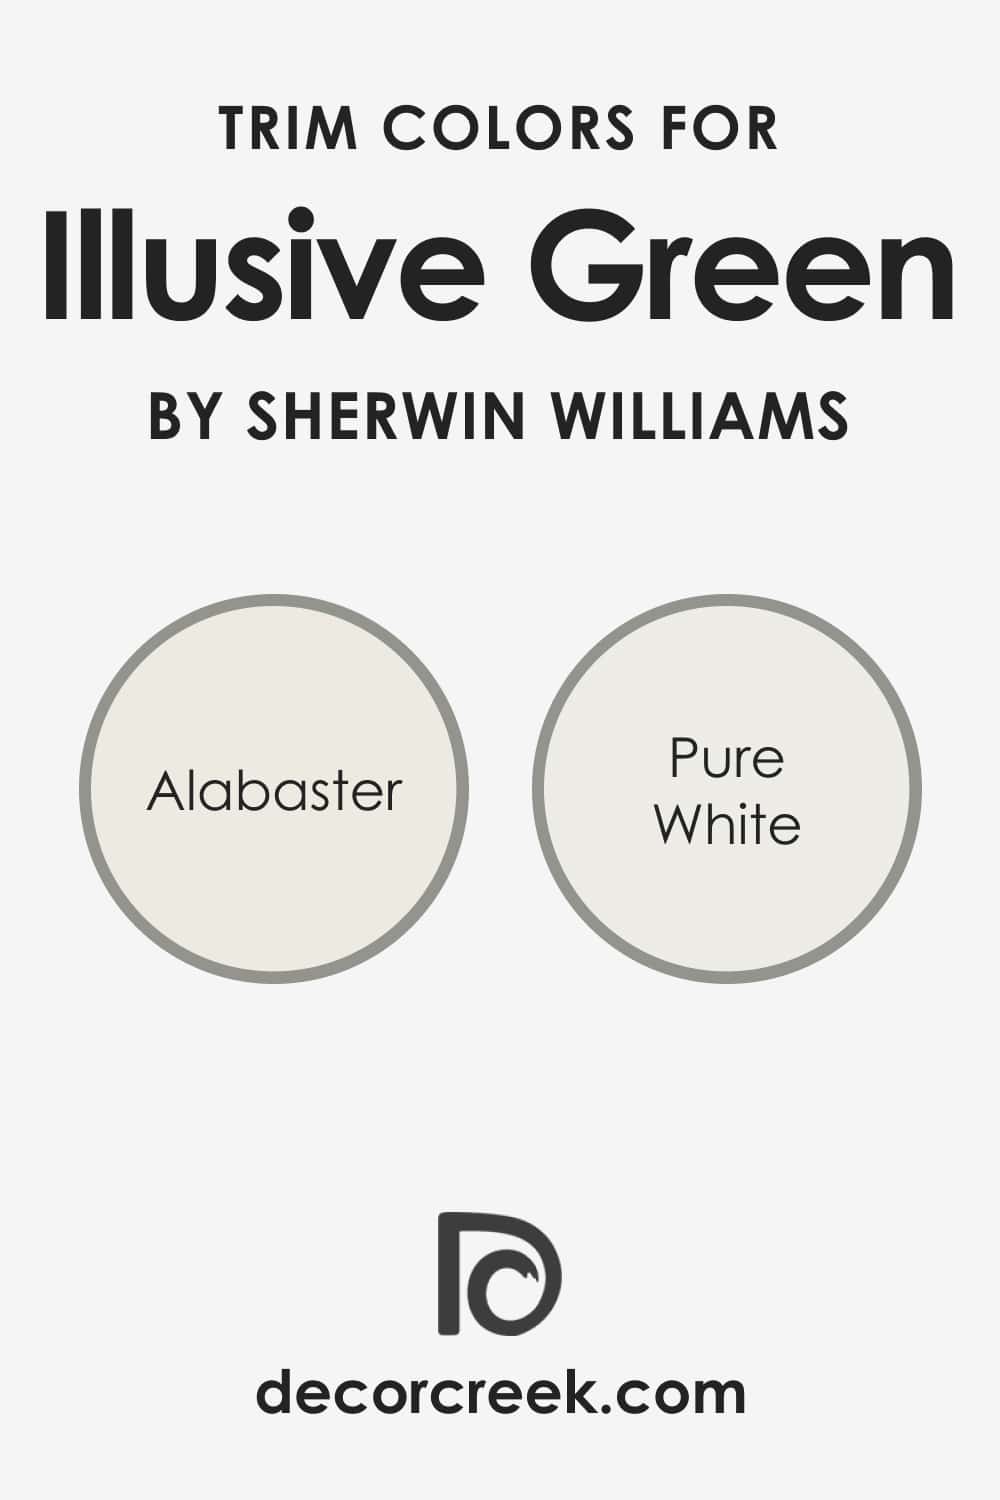 What Is the Best Trim Color of Illusive Green SW-9164?